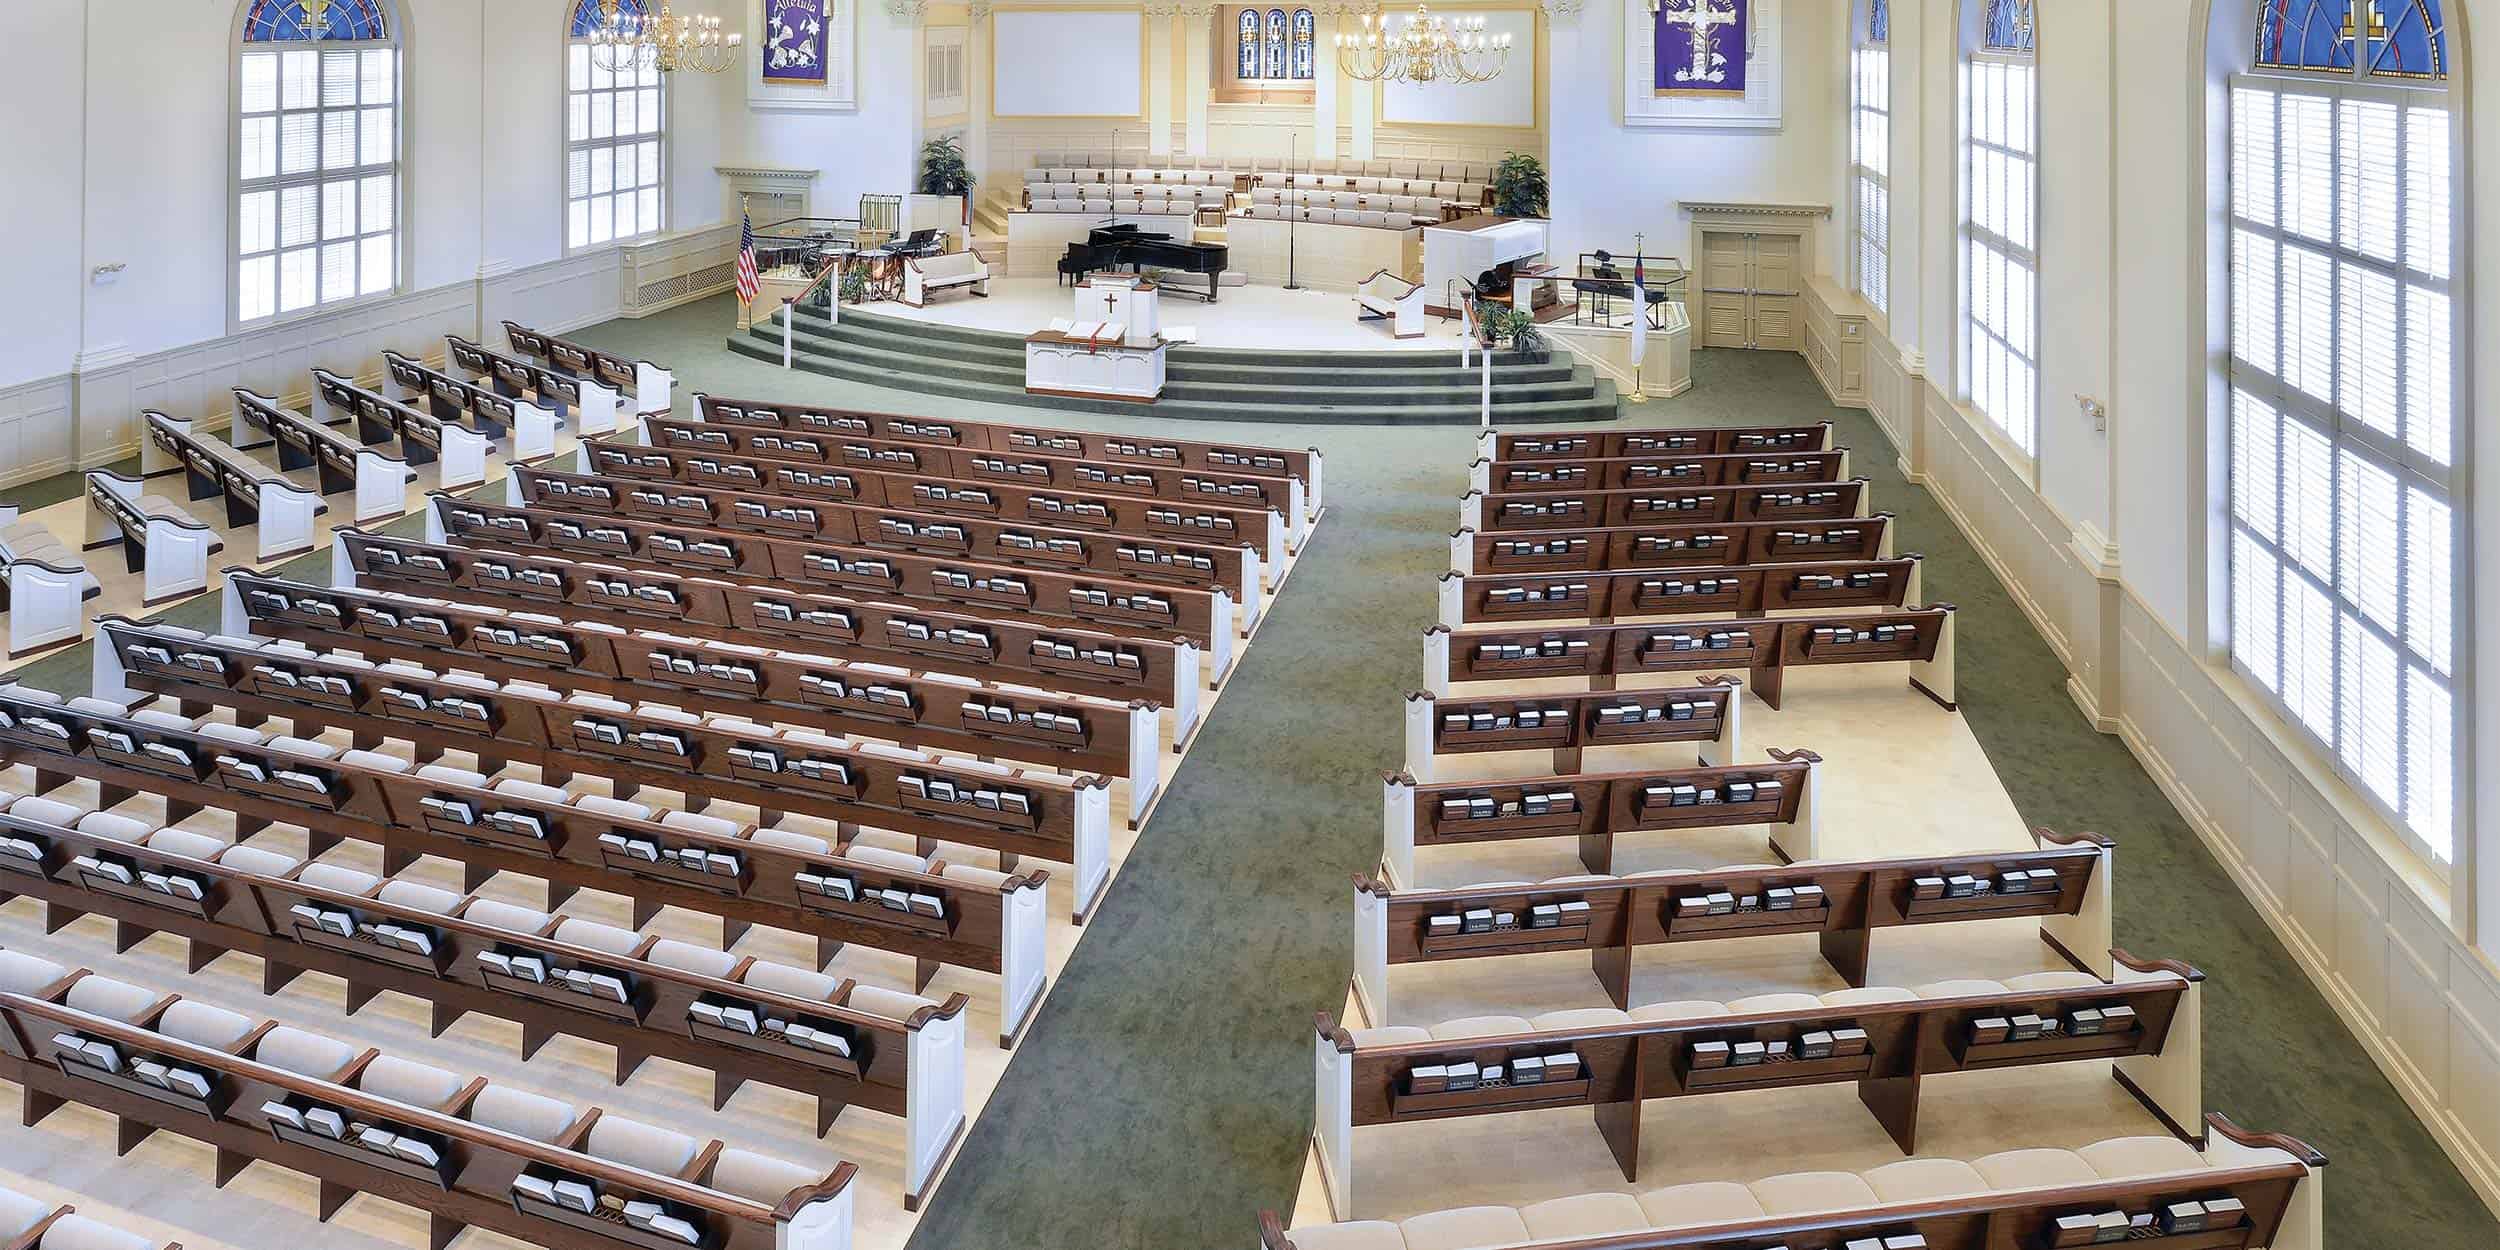 Pew Style Auditorium Seats combined with Pews with Individual Seats